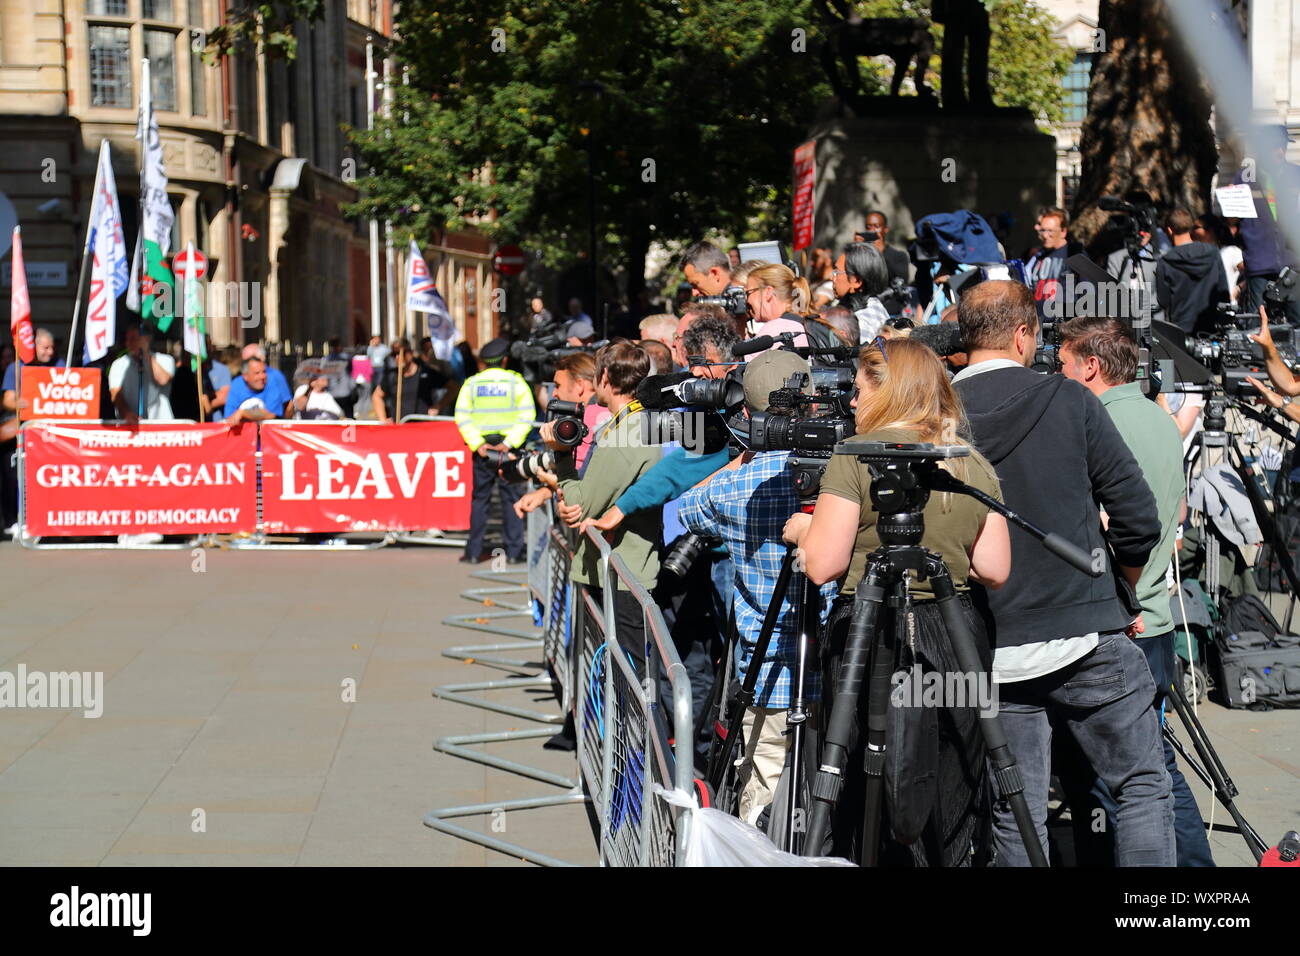 London, UK. 17th Sep, 2019. Remainers and Brexiteers gather at the Supreme Court amidst hightened interest of the media. Credit: Uwe Deffner/Alamy Live News Stock Photo